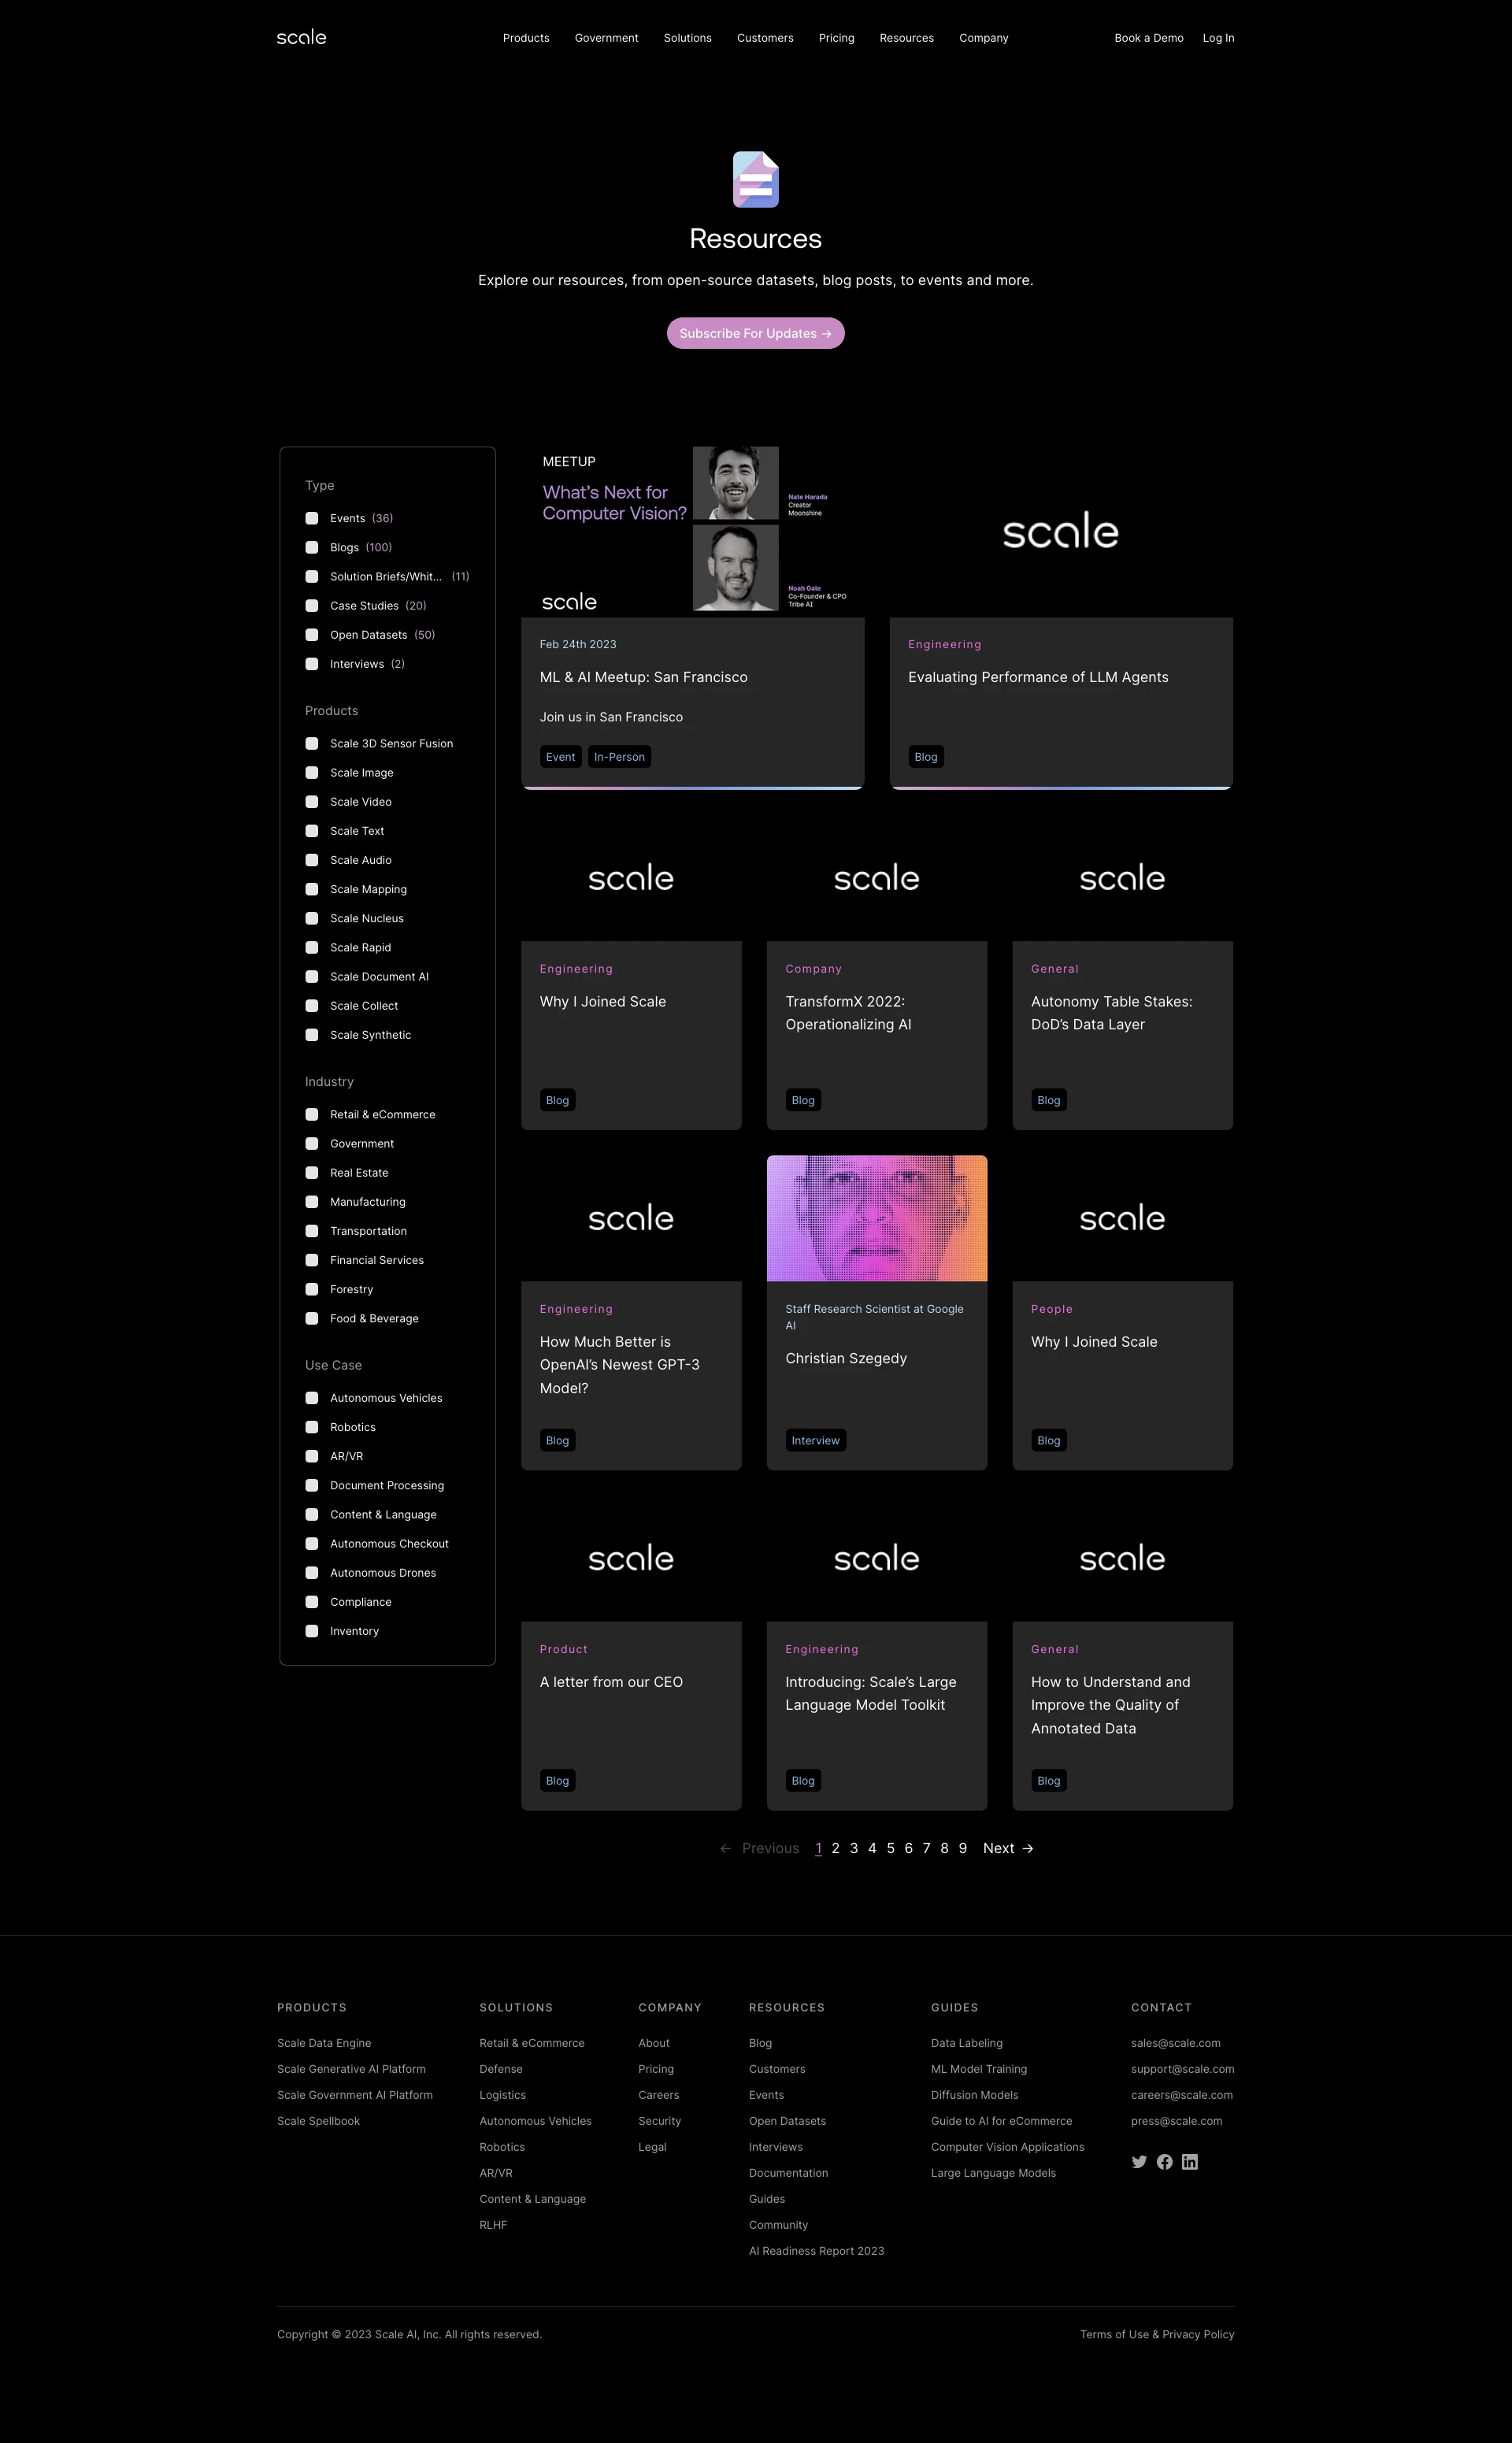 Scale AI Landing Page Example: Make the best models with the best data. Scale Data Engine leverages your enterprise data, and with Scale Generative AI Platform, safely unlocks the value of AI.